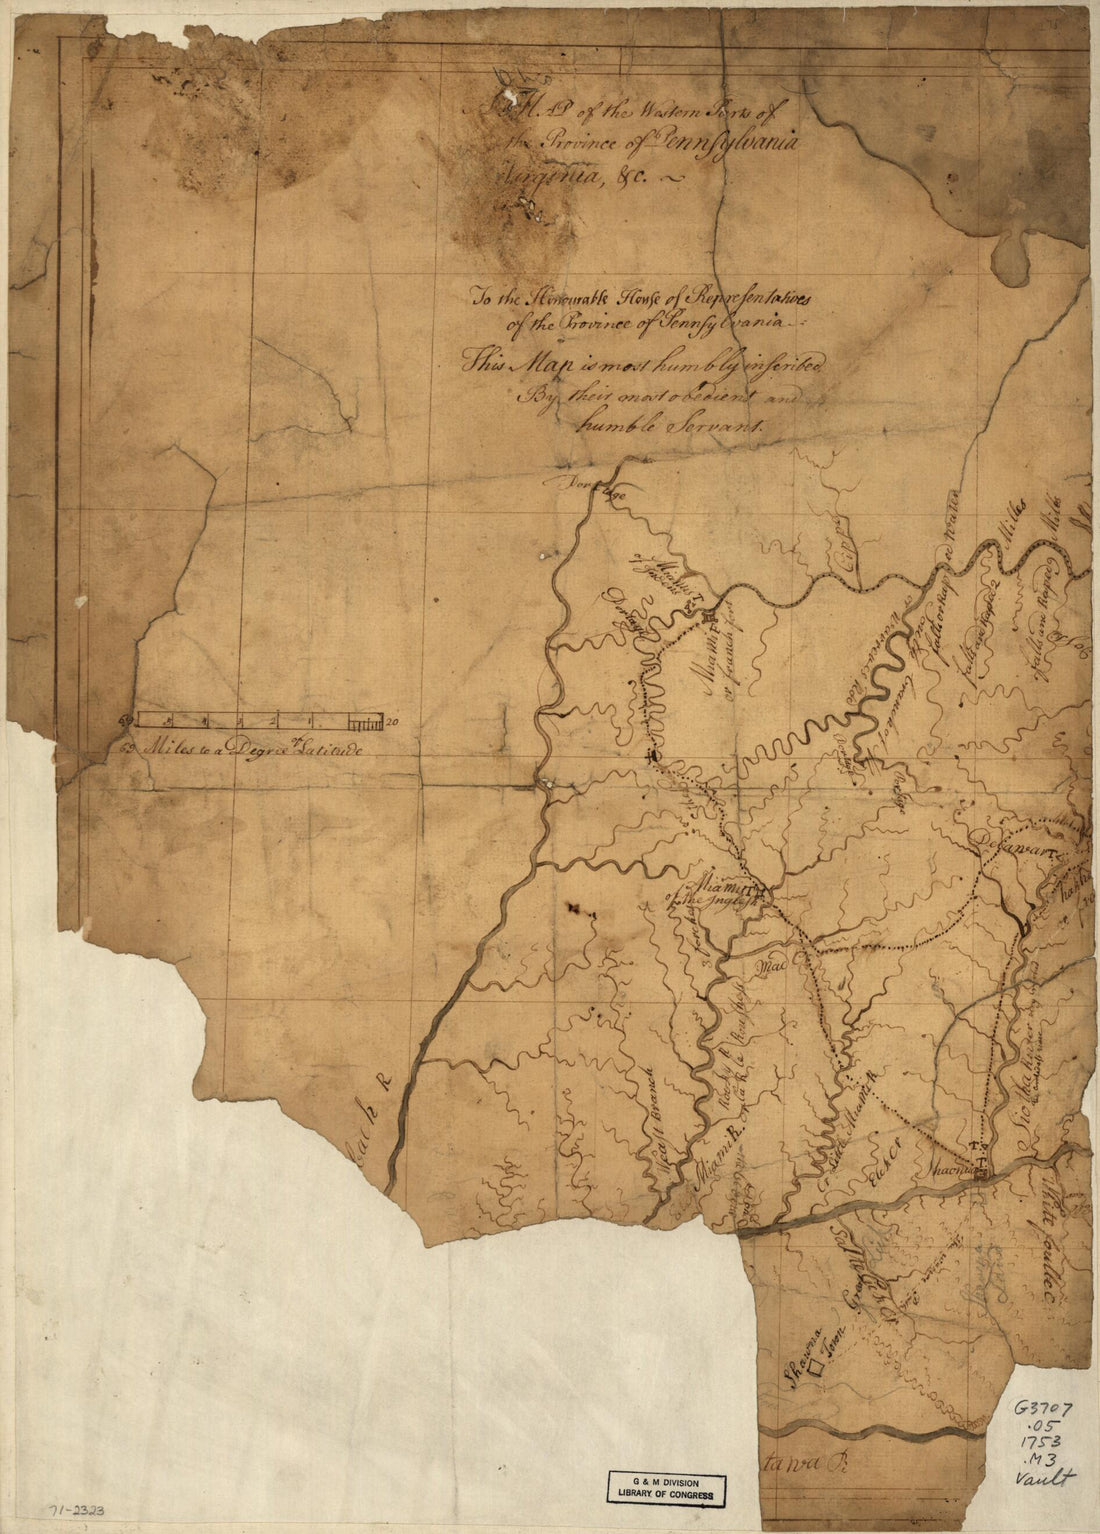 This old map of A Map of the Western Parts of the Province of Pennsylvania, Virginia, &amp;c from 1753 was created by John Patten in 1753